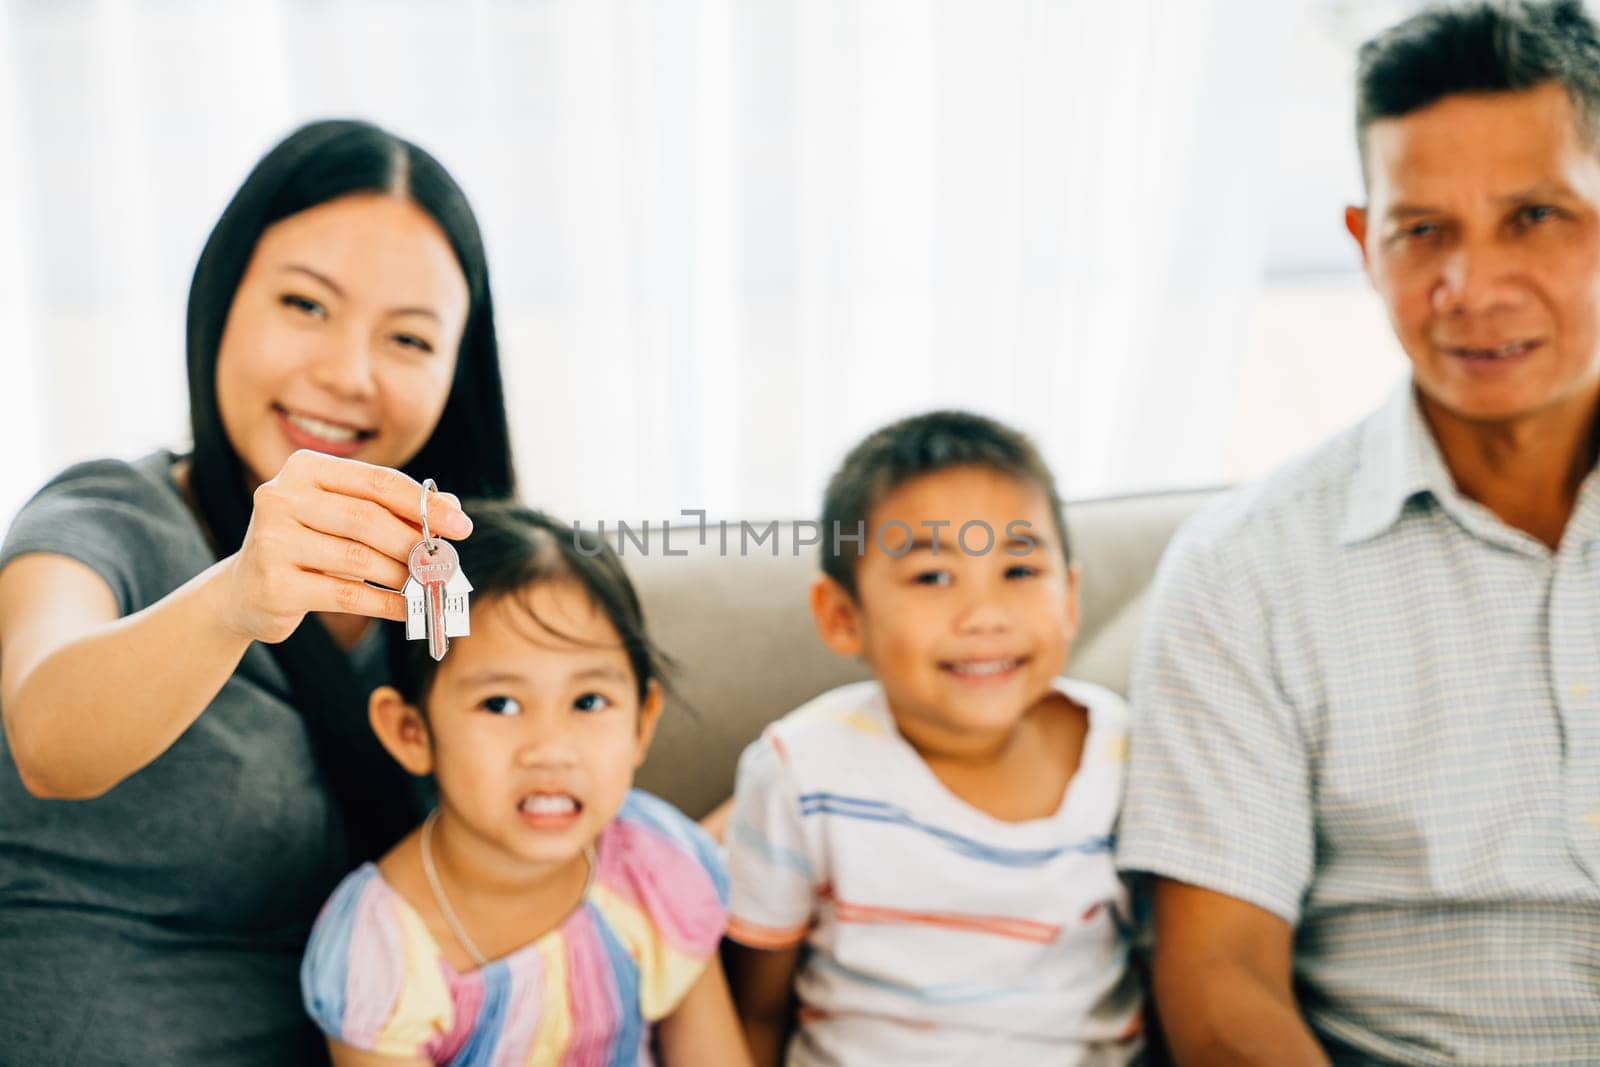 A smiling mother holding keys to their new house shares a joyful family moment by Sorapop